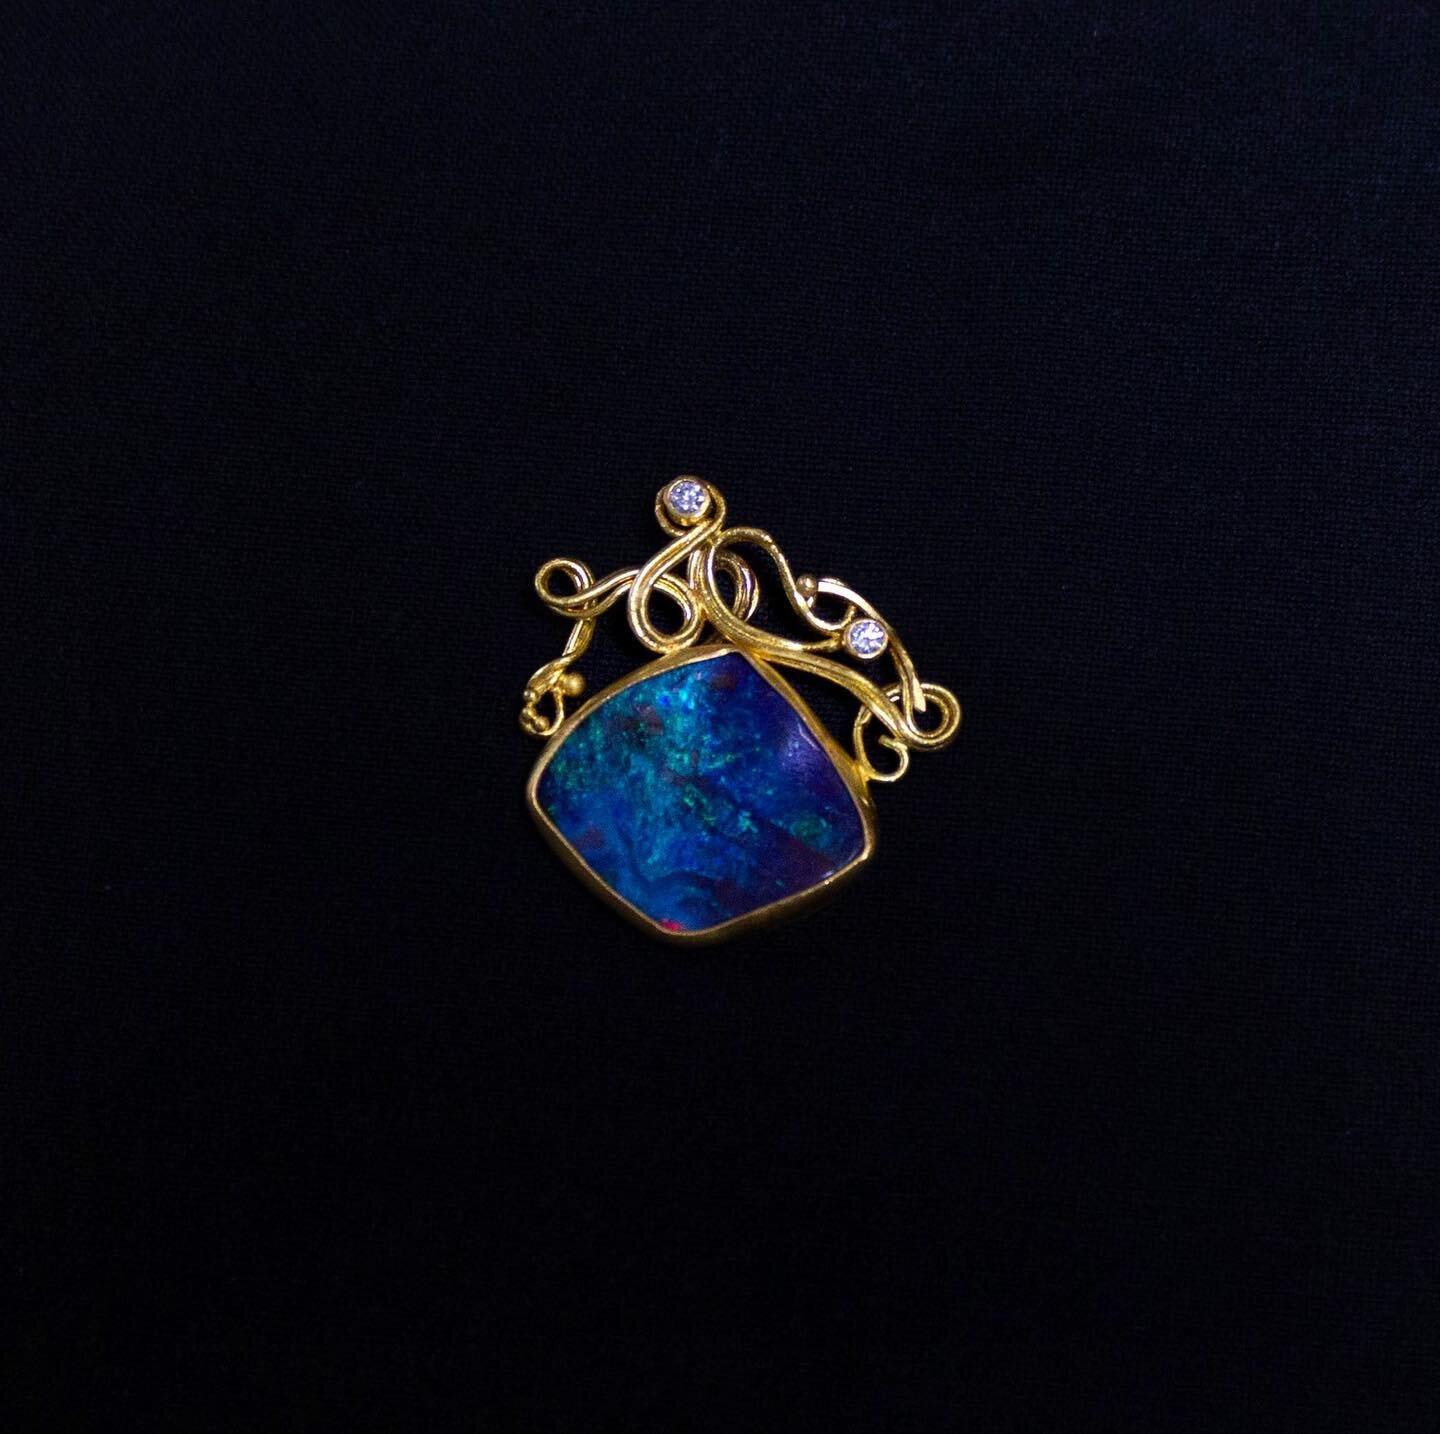 The newest 17.11 carat Boulder Opal photographed by the incredibly talented @claydavidsononsgard This piece was handmade and designed by Karen L. Davidson. Custom pieces available.
.
.
.
#karenldavidson #karendavidson #clay #claydavidsononsgard #opal